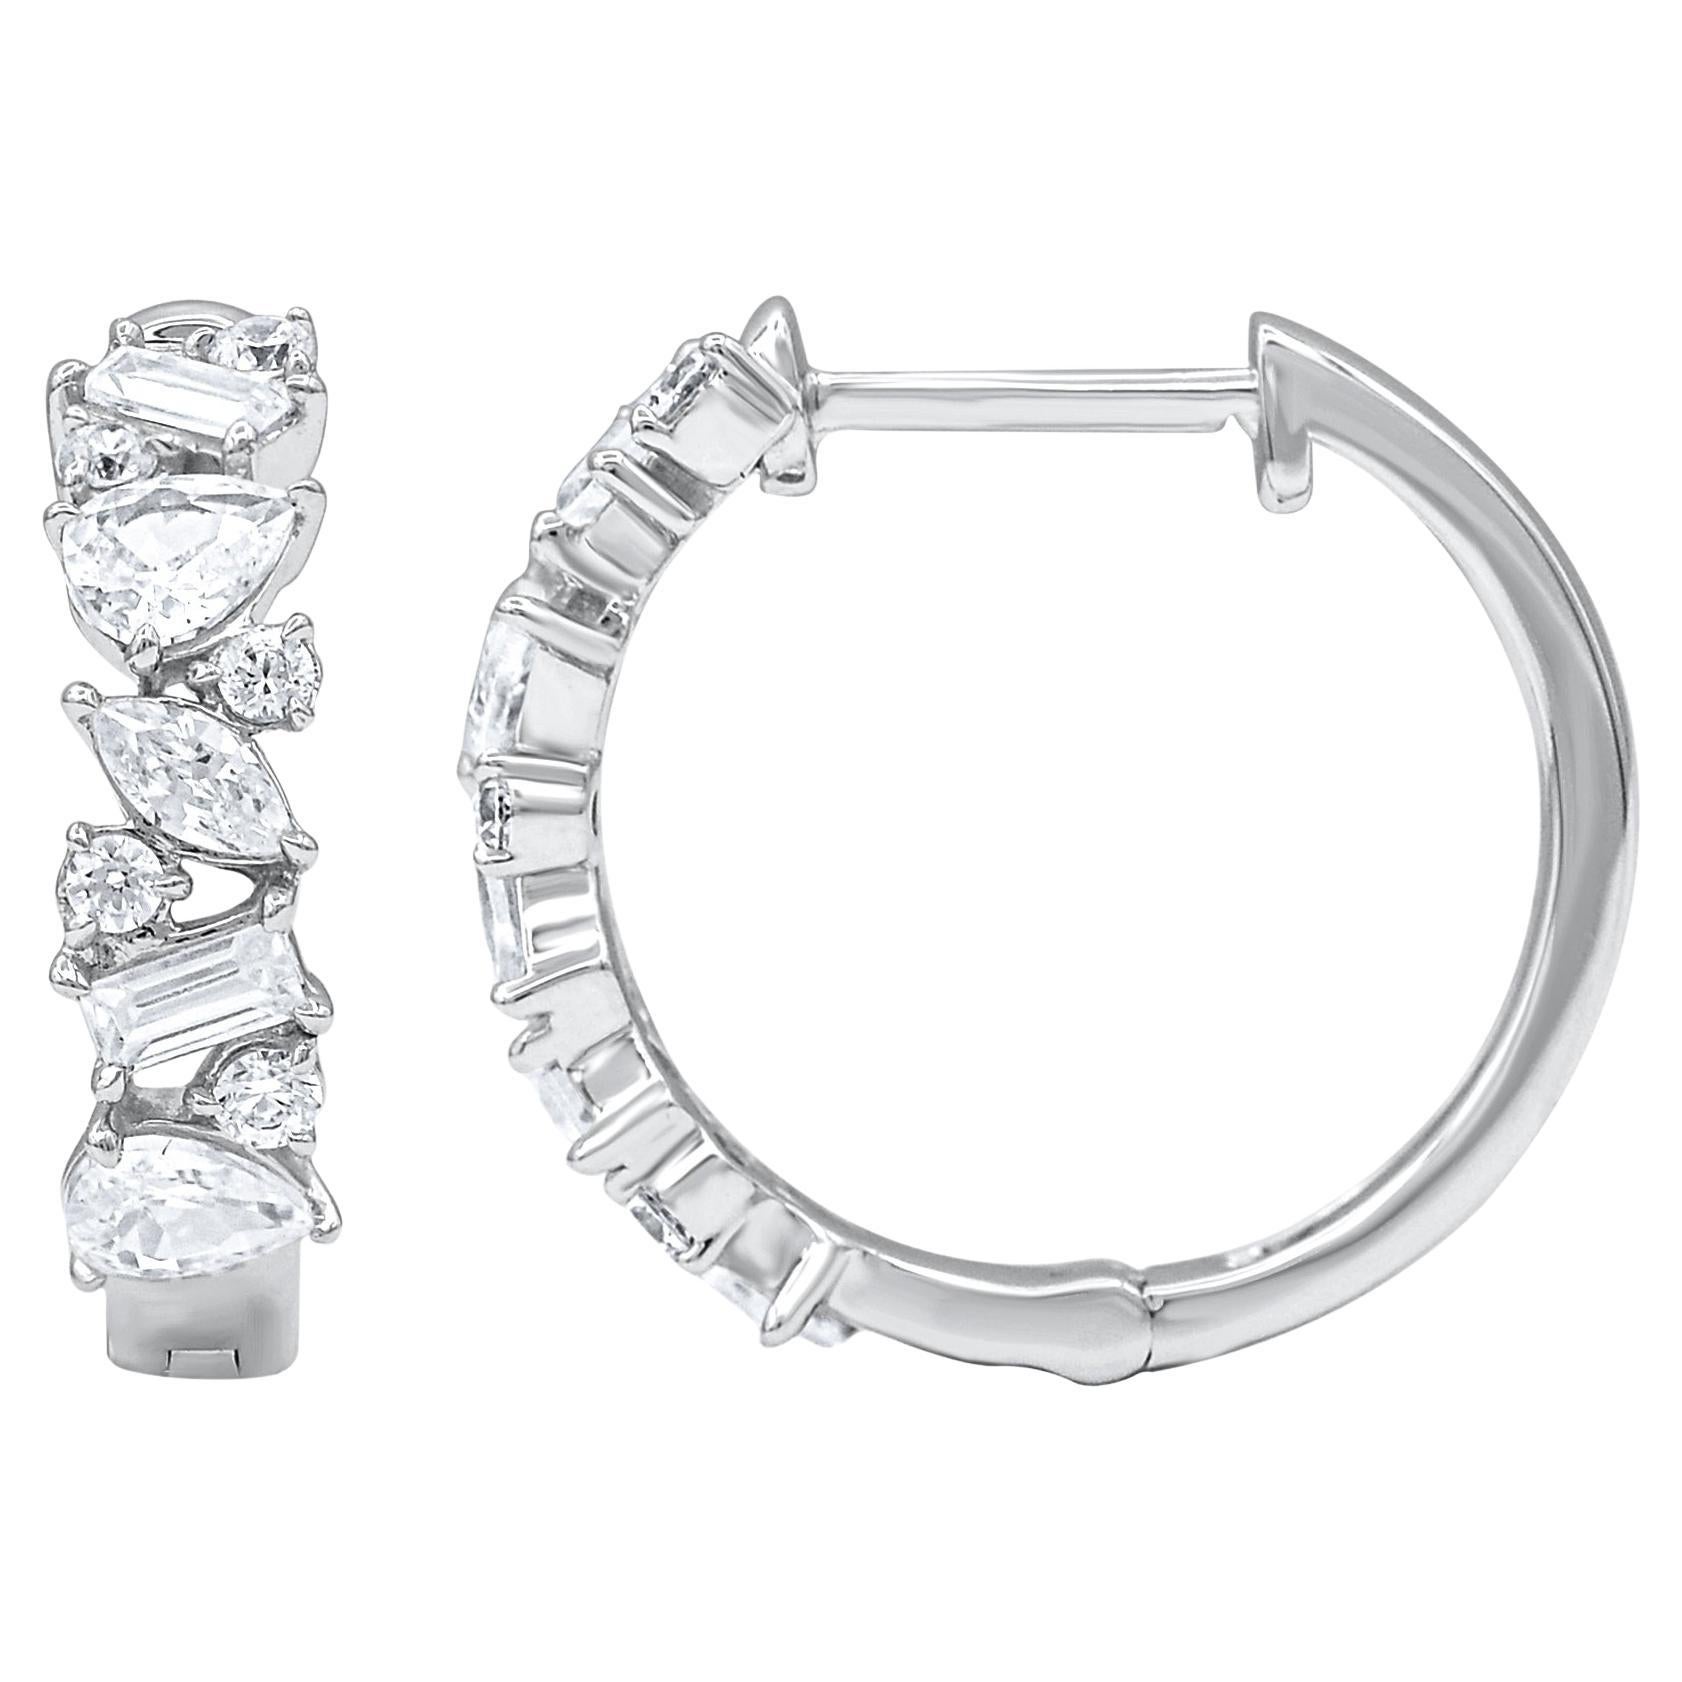 Timeless and elegant, these diamond hoop earrings are a style you'll wear with every look in your wardrobe. Crafted in 18 karat white gold with 20 Pear, Marquise, baguette & brilliant cut diamond in prong setting. Total diamond weight is 1.0 carat.